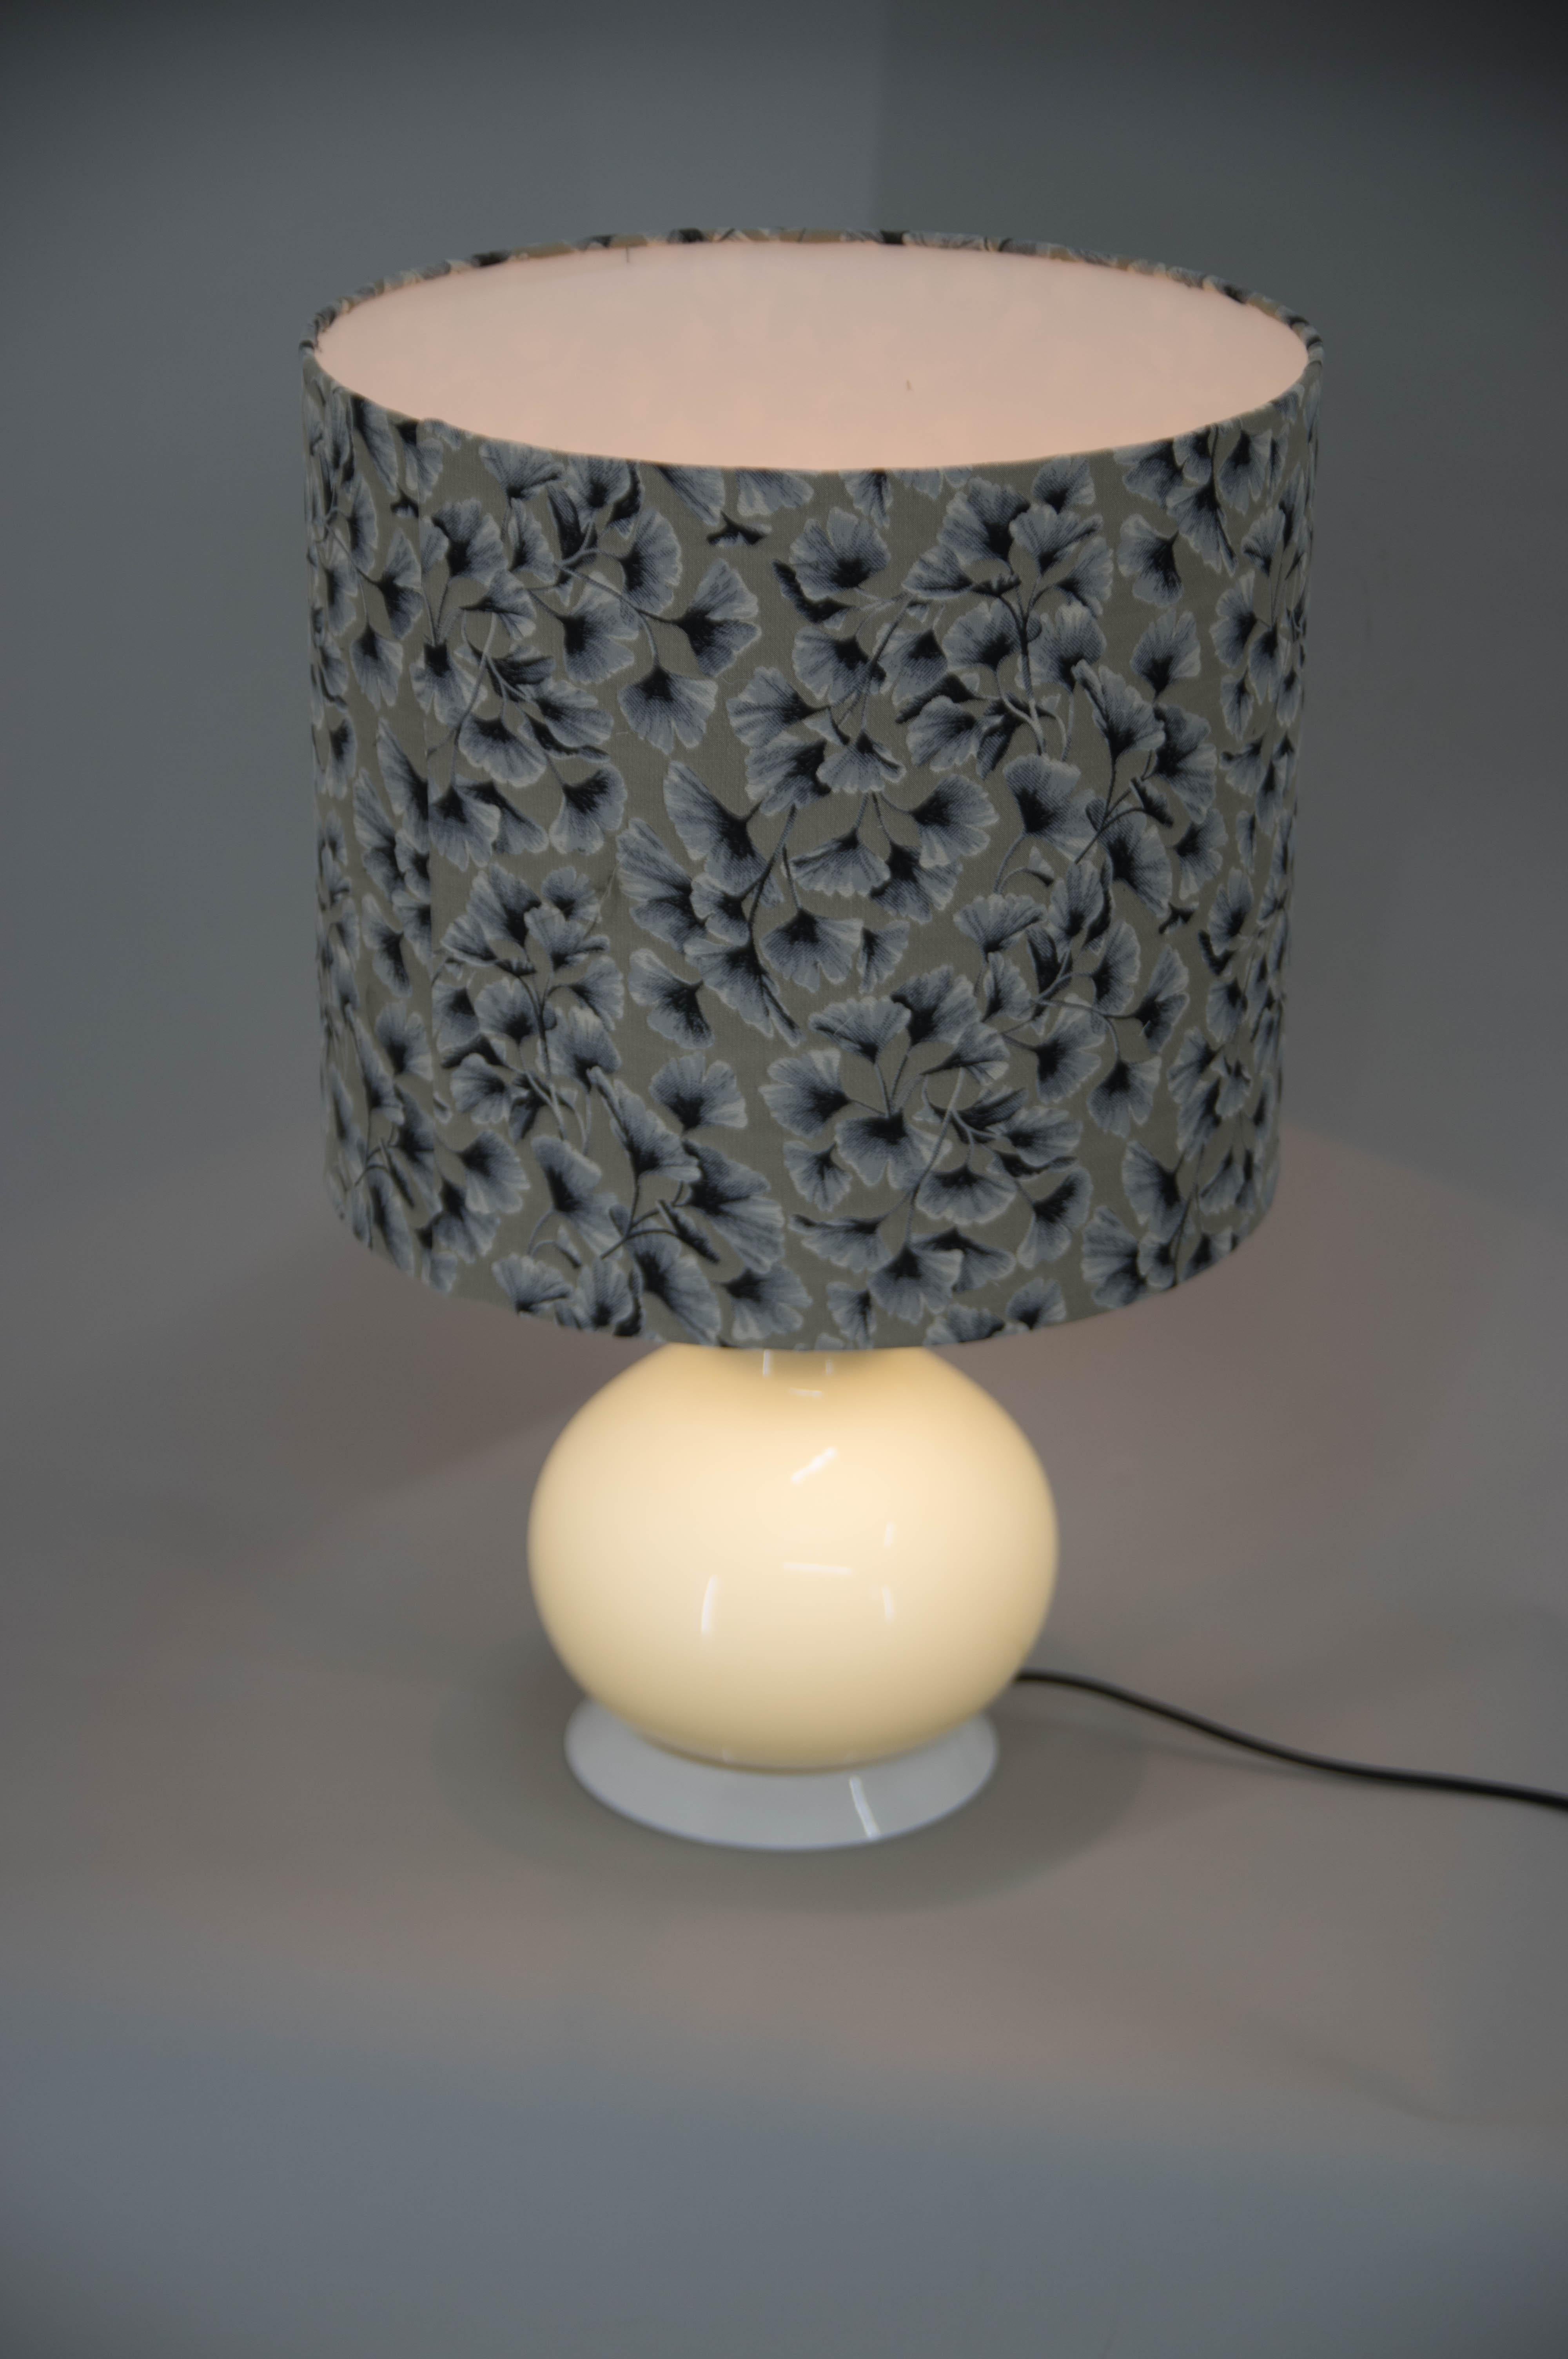 Big design table lamp with two separate circuits, one in glass leg and other in a shade.
New shade made of high quality fabric.
Two switches.
US plug adapter included.